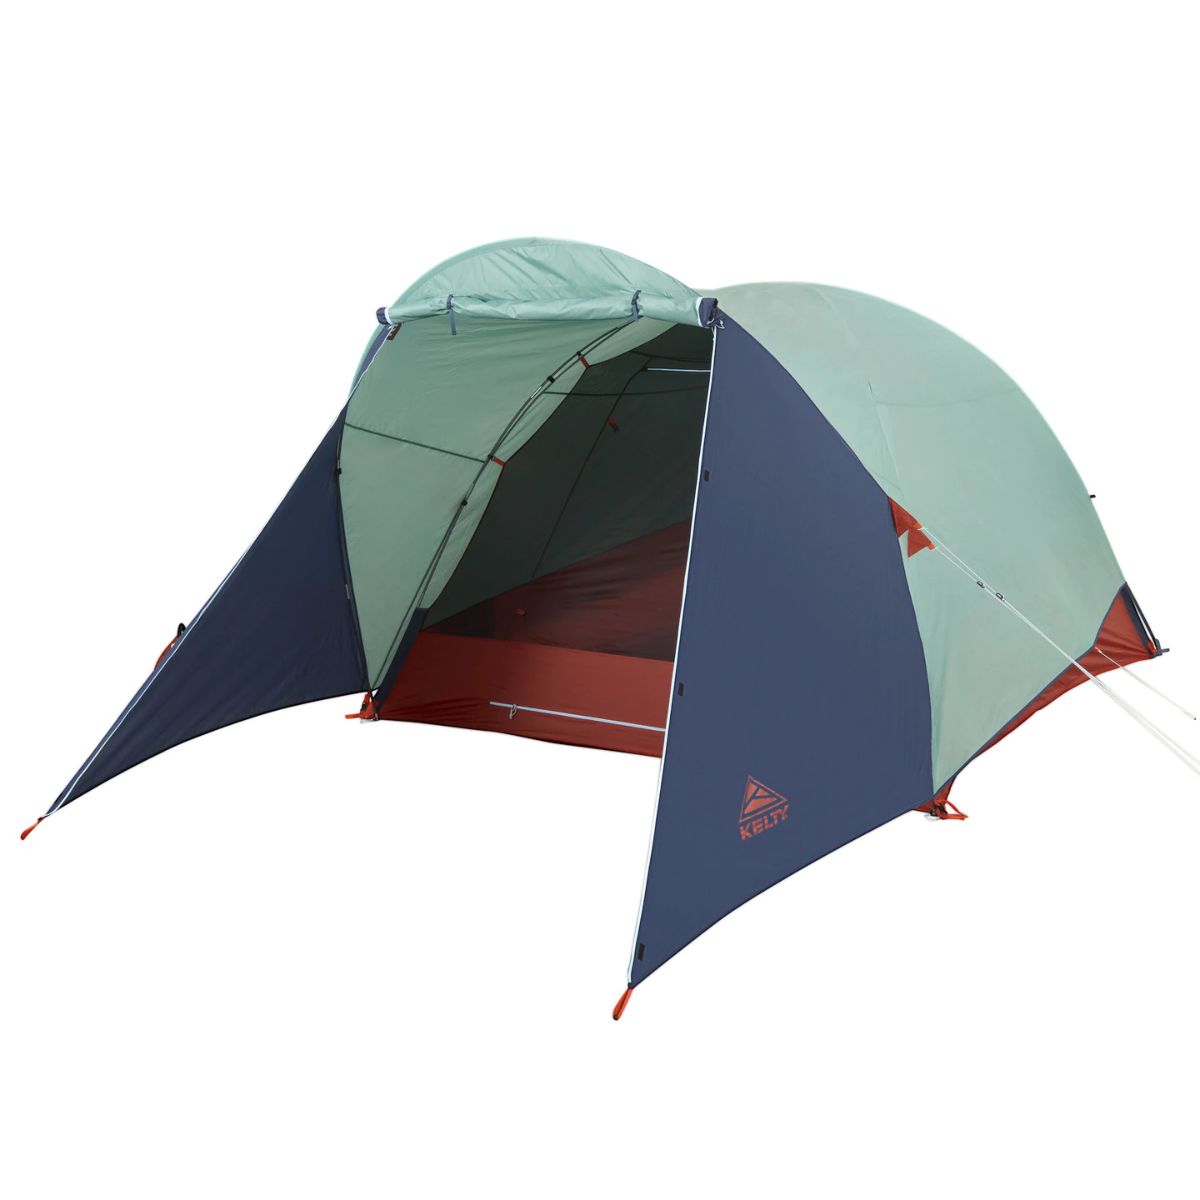 Raap zuur lading Kelty Rumpus 6-Person Tent with Vestibule | Large Family Tent